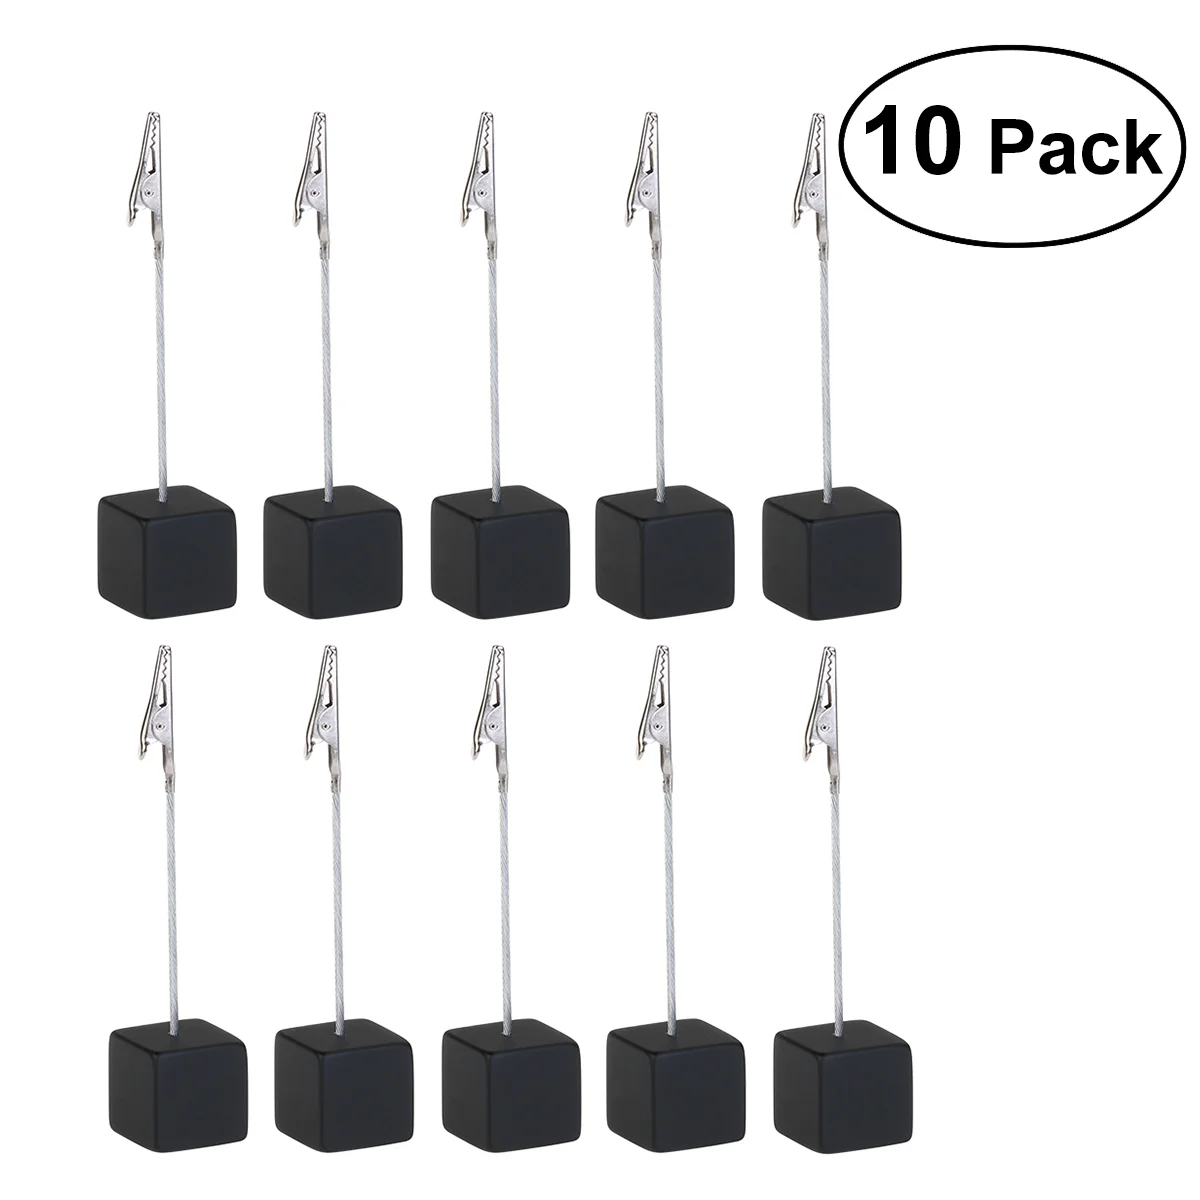 

10pcs Cube Base Memo Clips Holder Table Holder with Alligator Clip Clasp Photo Clips Stand Cards Place Holder for Home Office